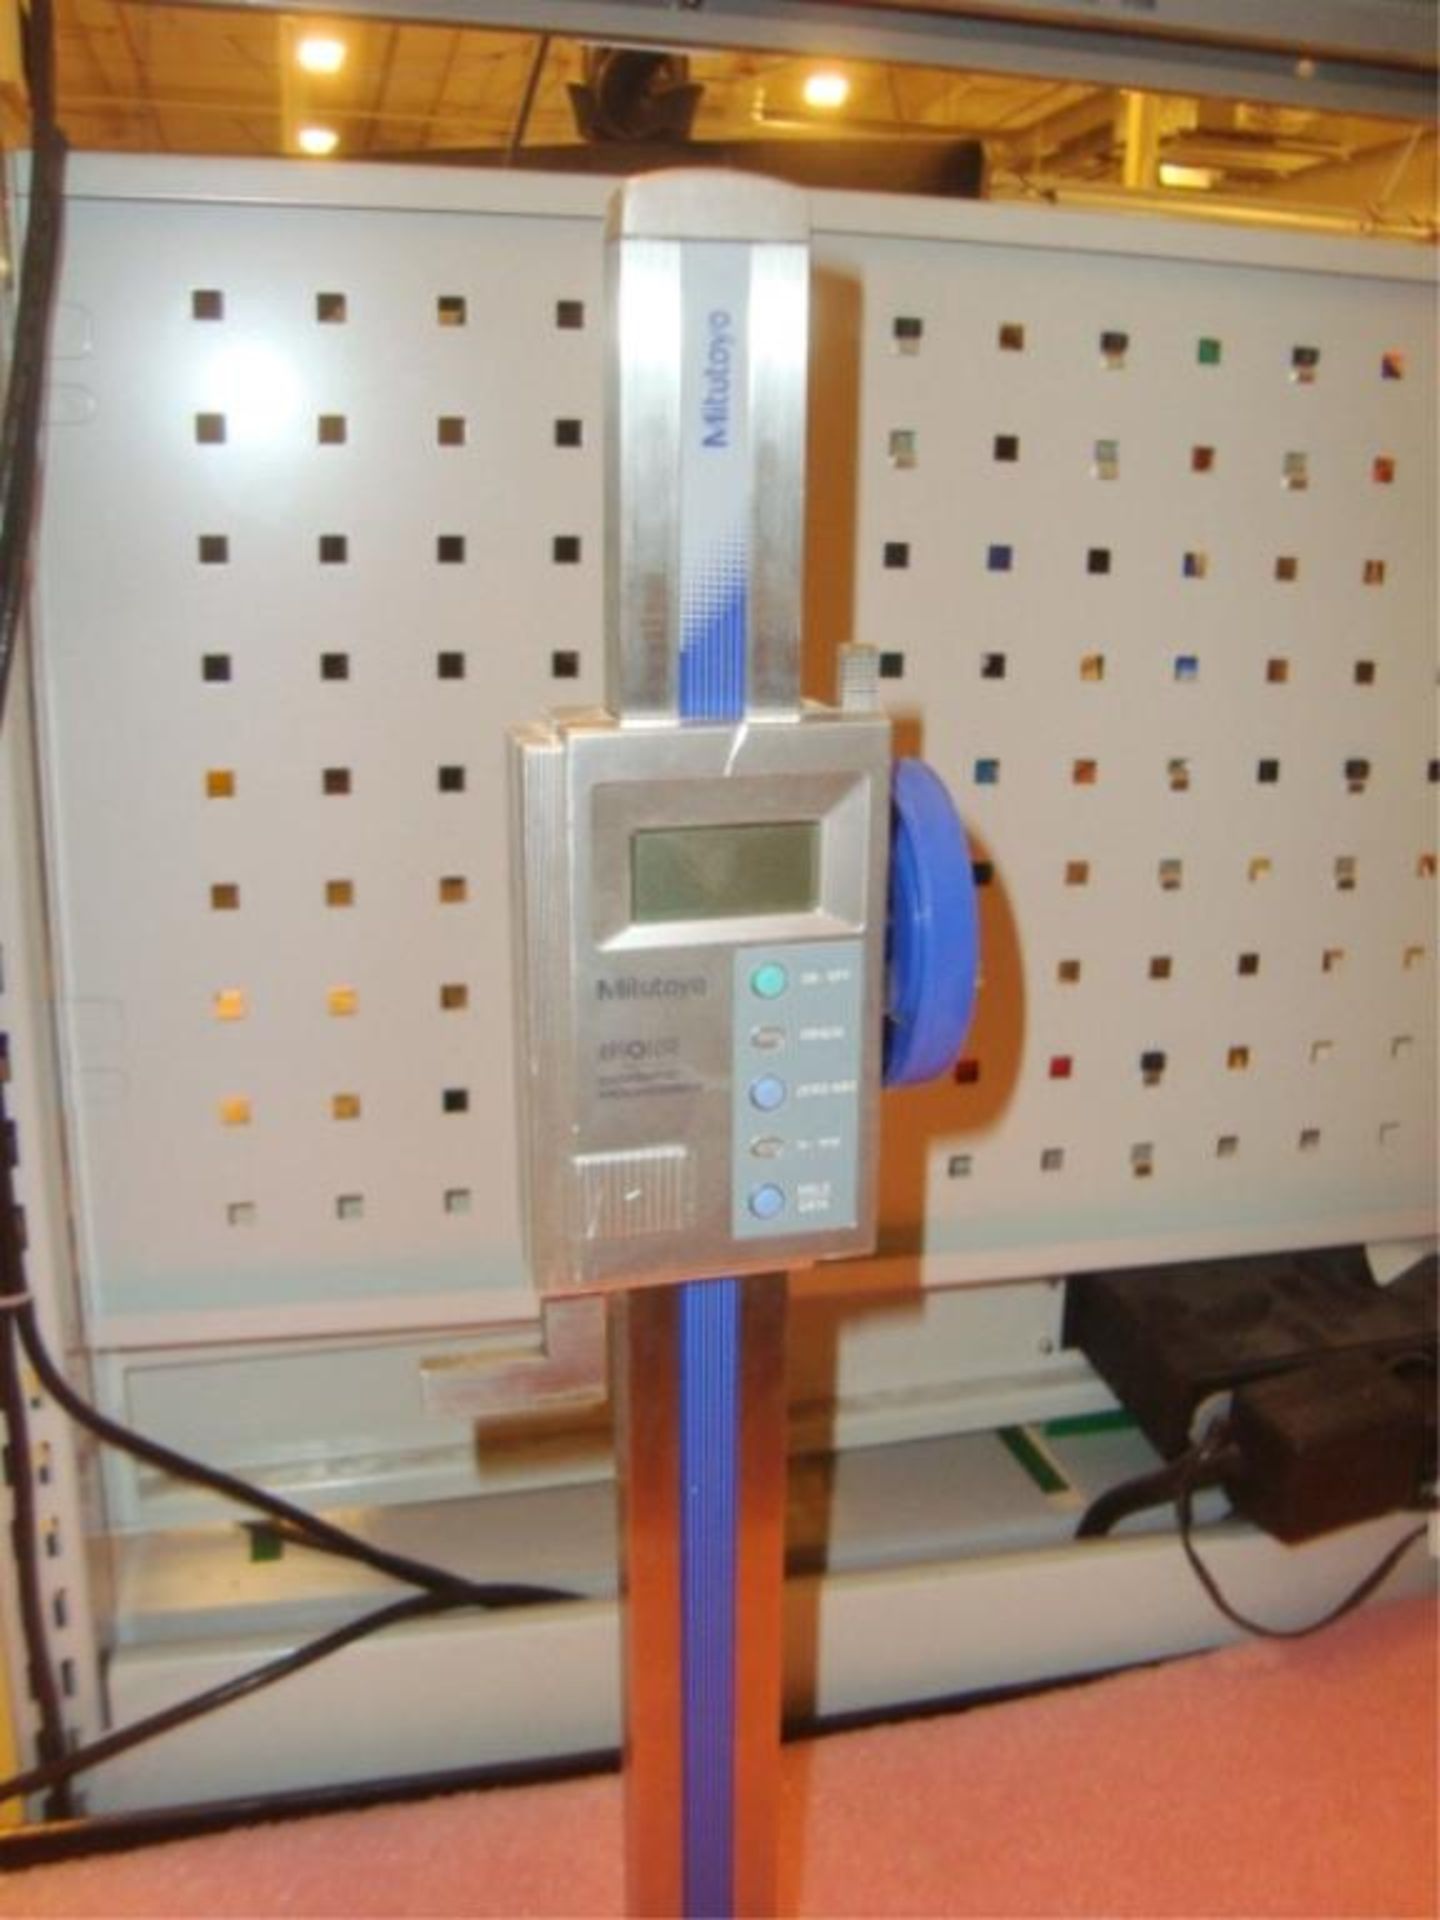 Absolute Digimatic 12" in. Height Gage - Image 2 of 4